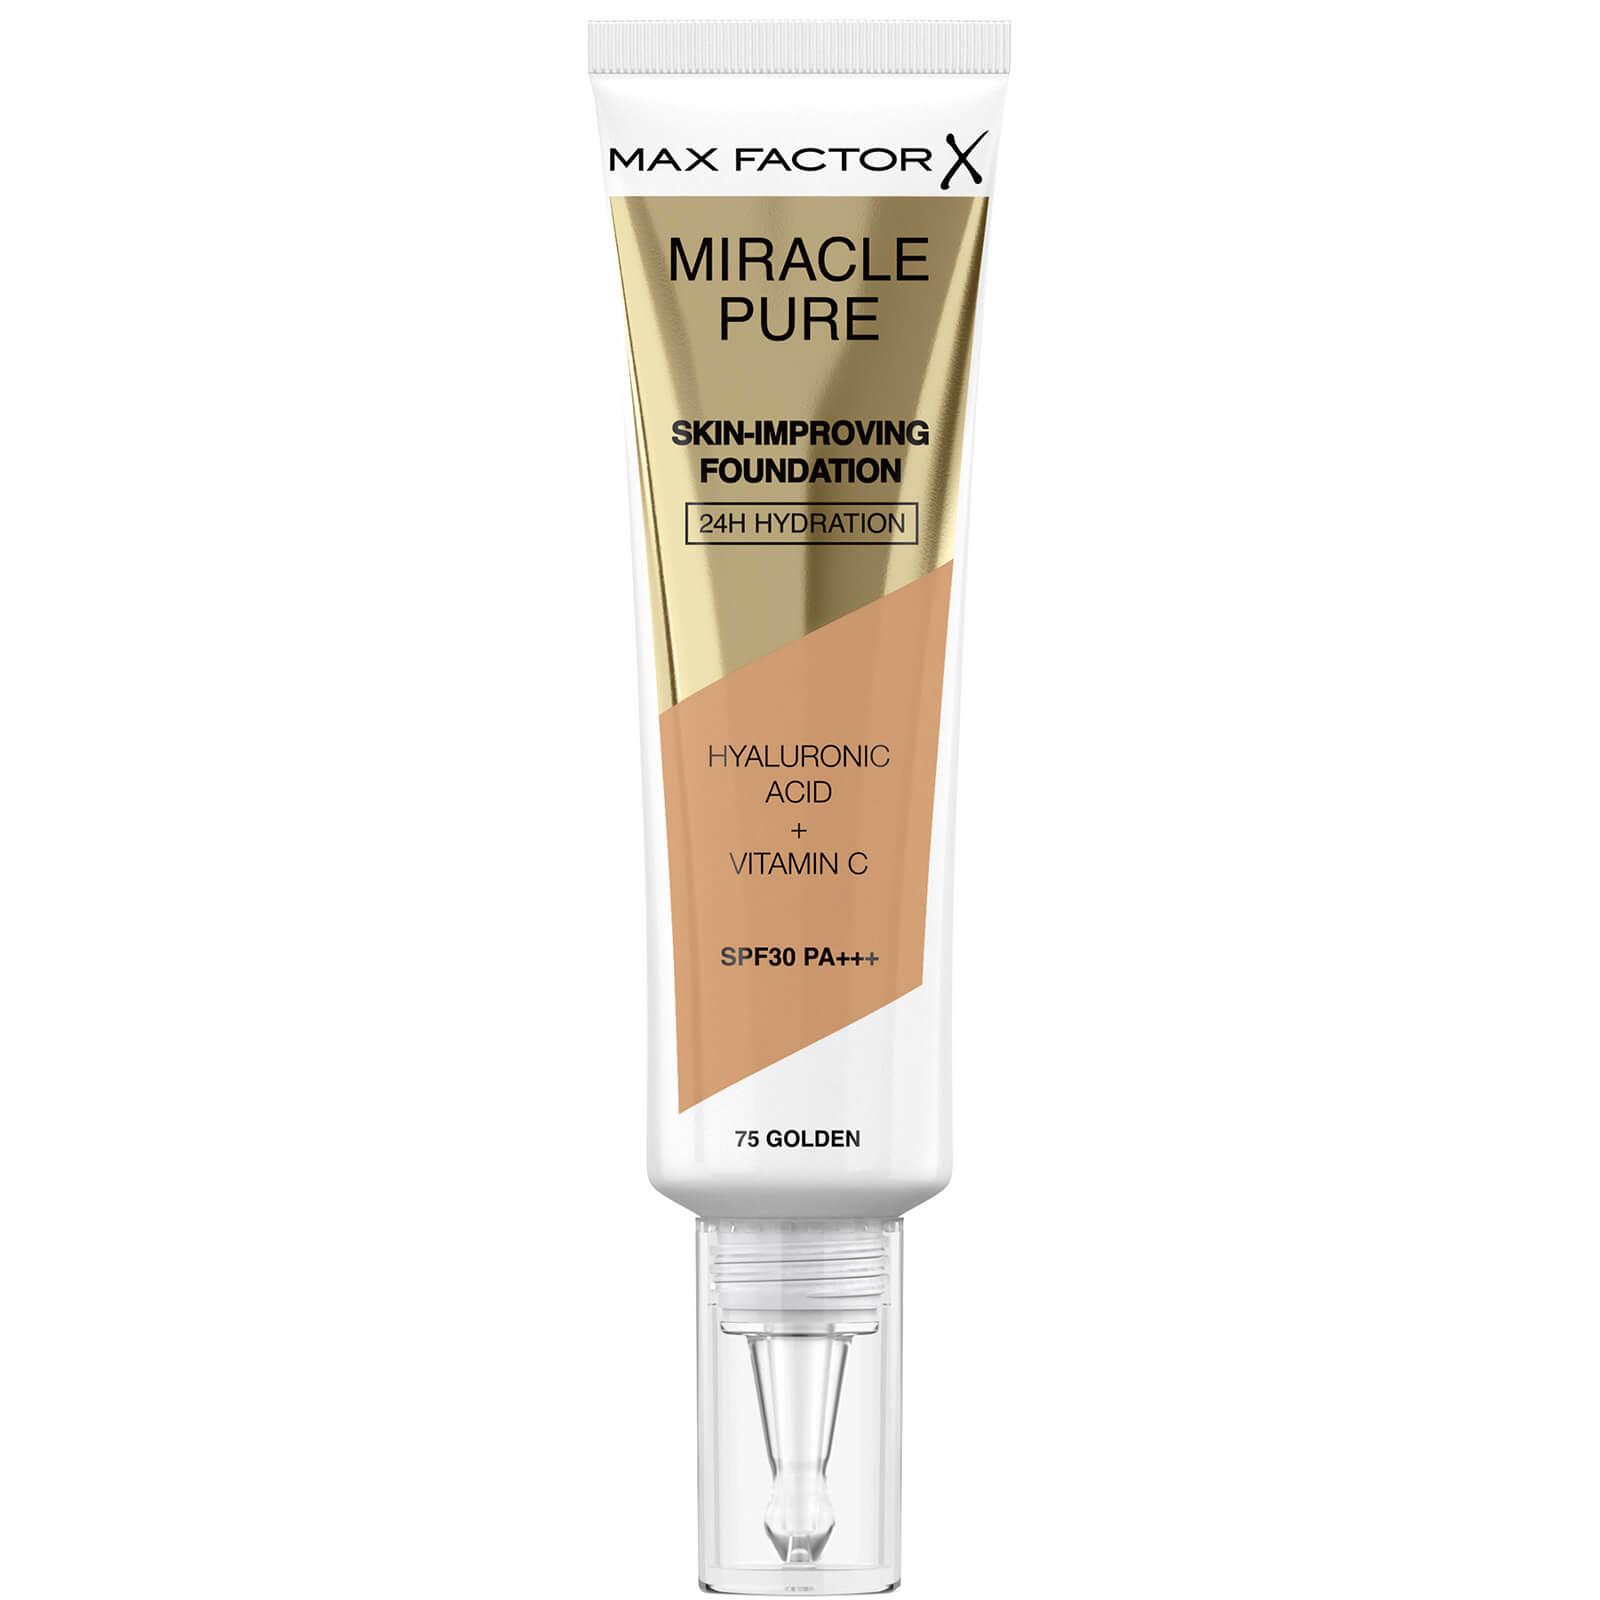 Max Factor Miracle Pure Skin Improving Foundation 30ml (Various Shades) - Golden